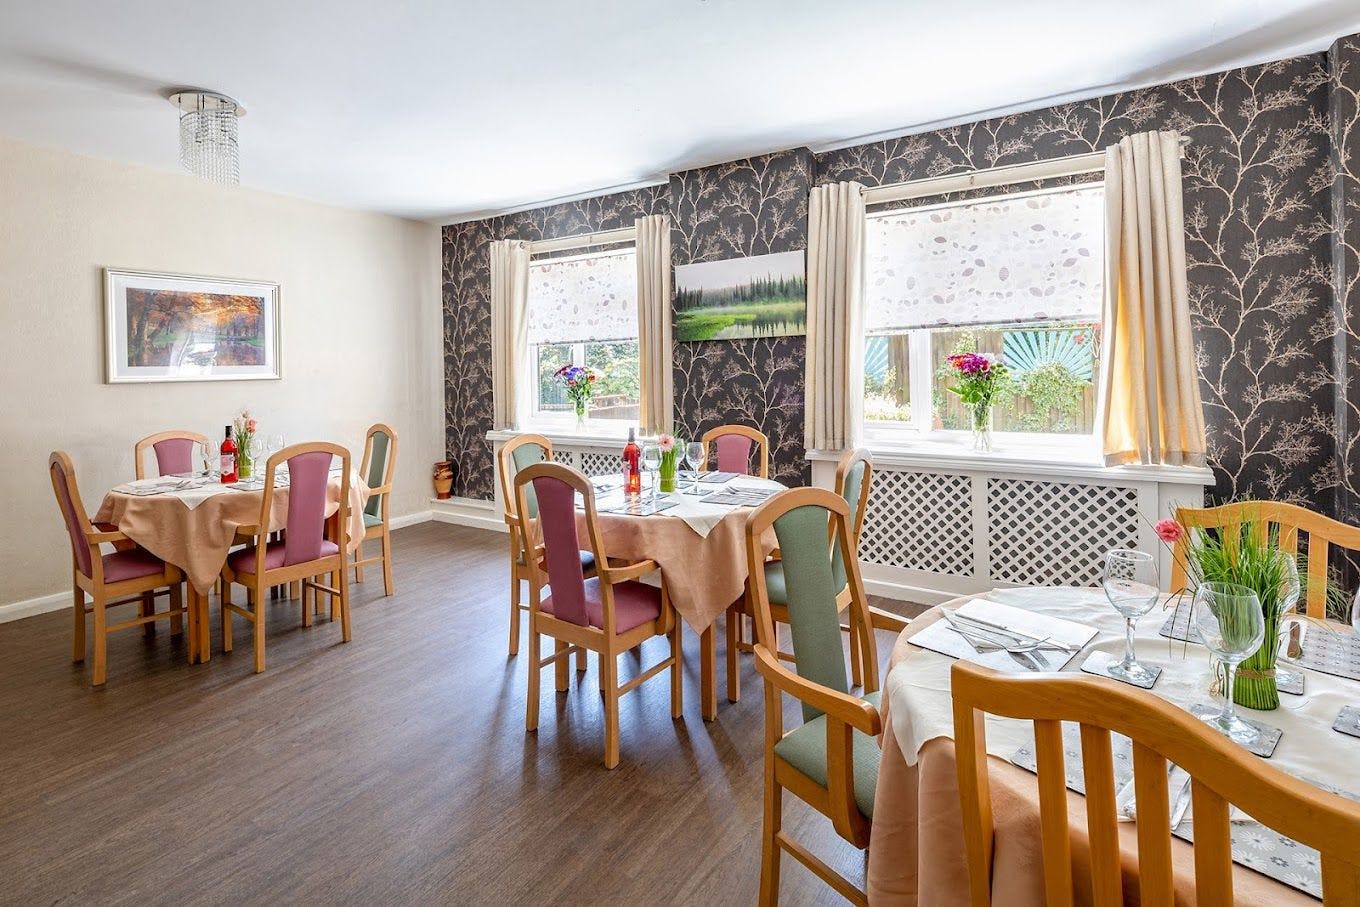 Summit Care Group - Ashbourne care home 002